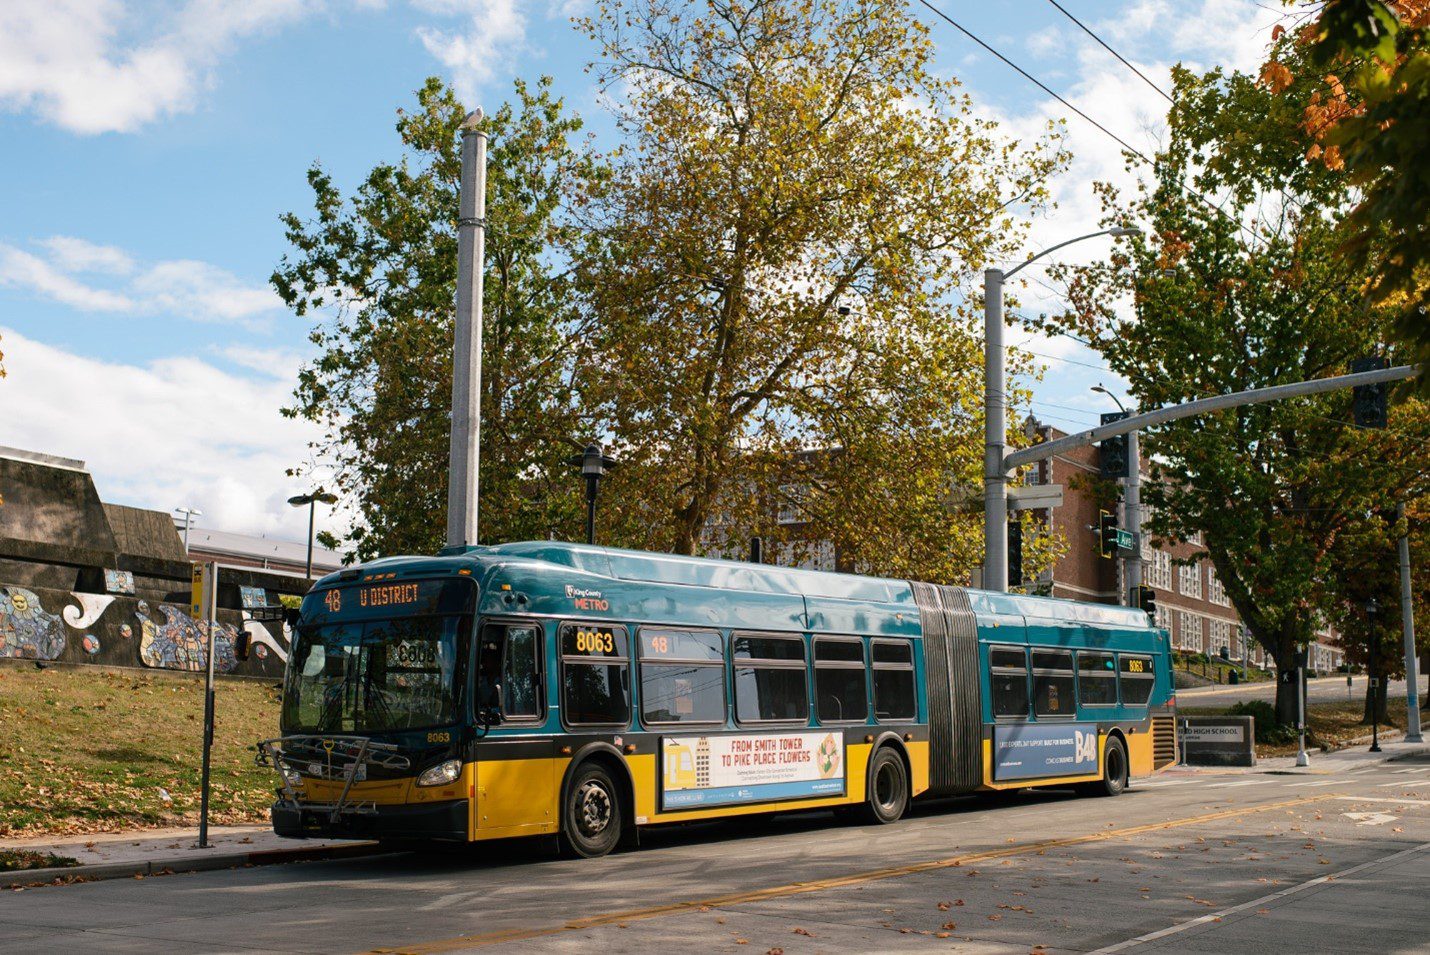 A King County Metro bus number 48 waits at a bus stop on a partly sunny fall day. Large buildings and mature trees are in the background.